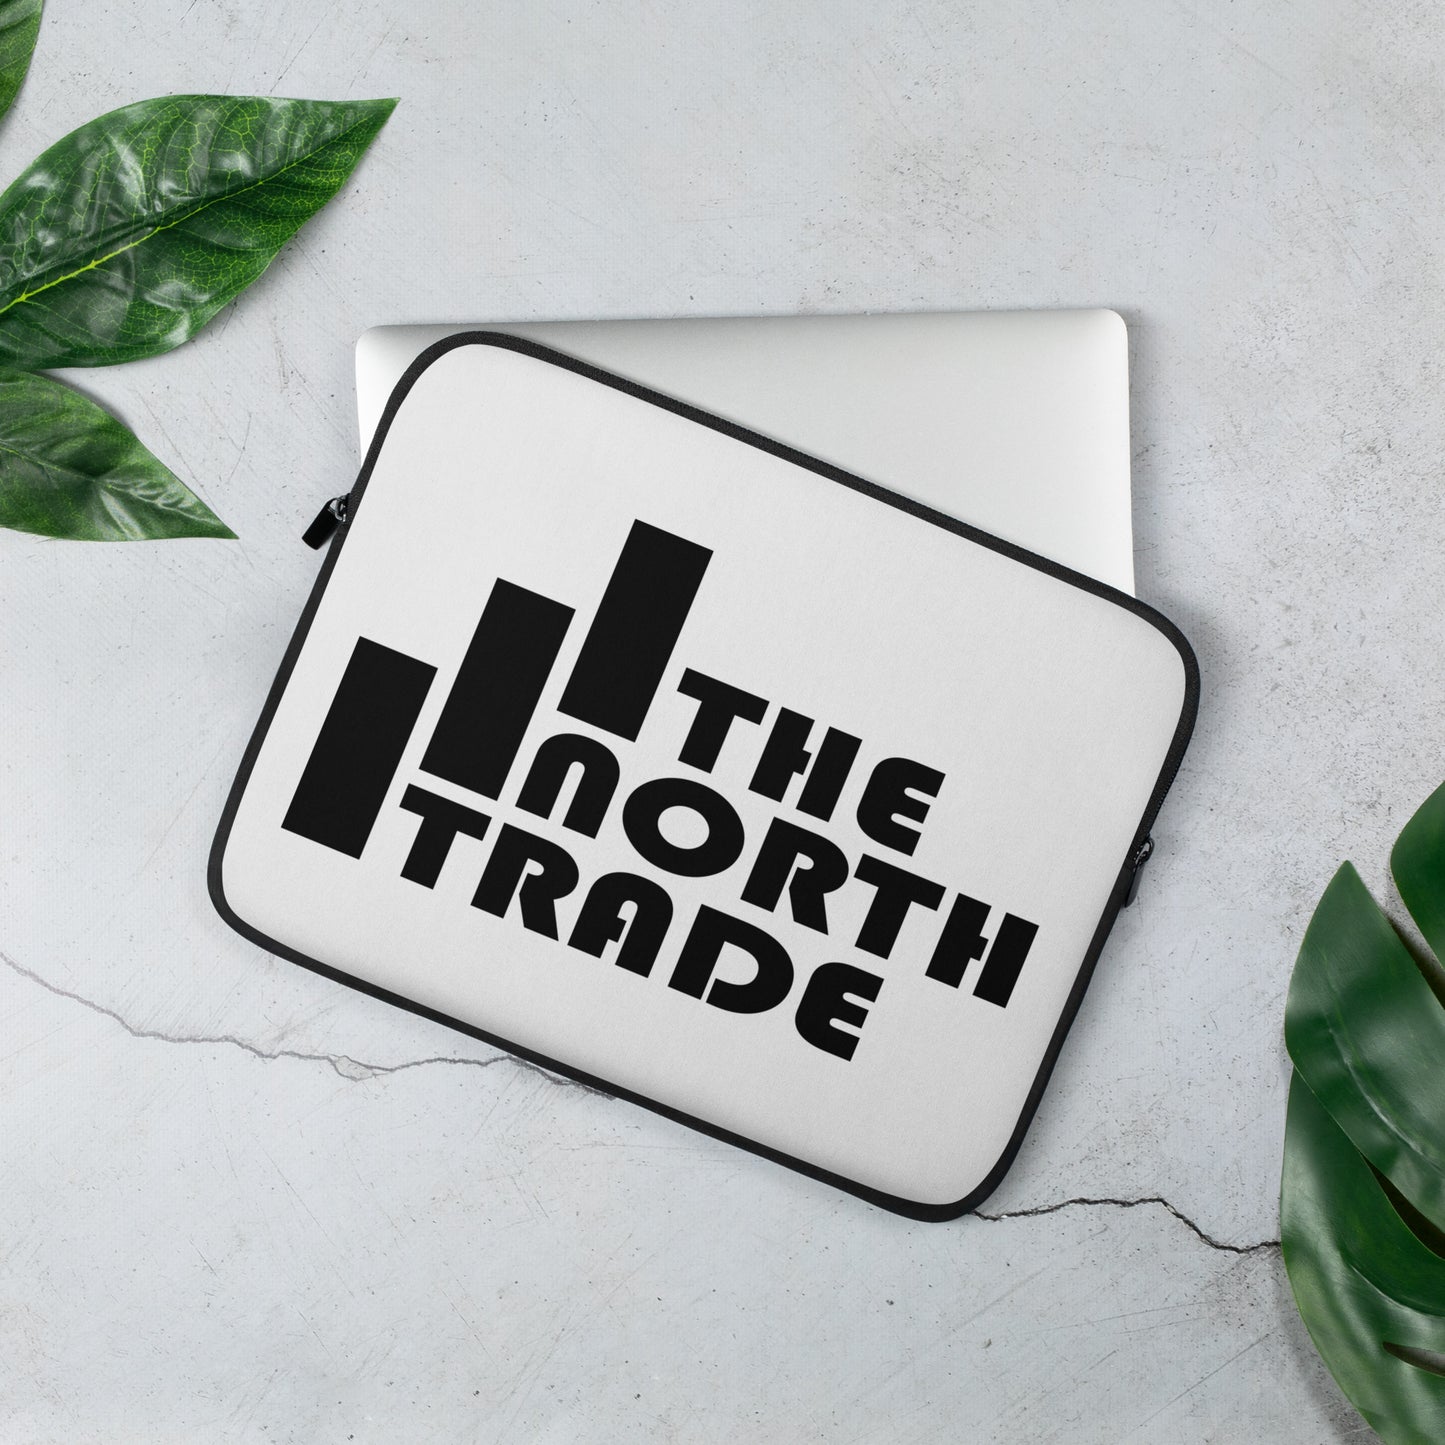 The North Trade Laptop Sleeve